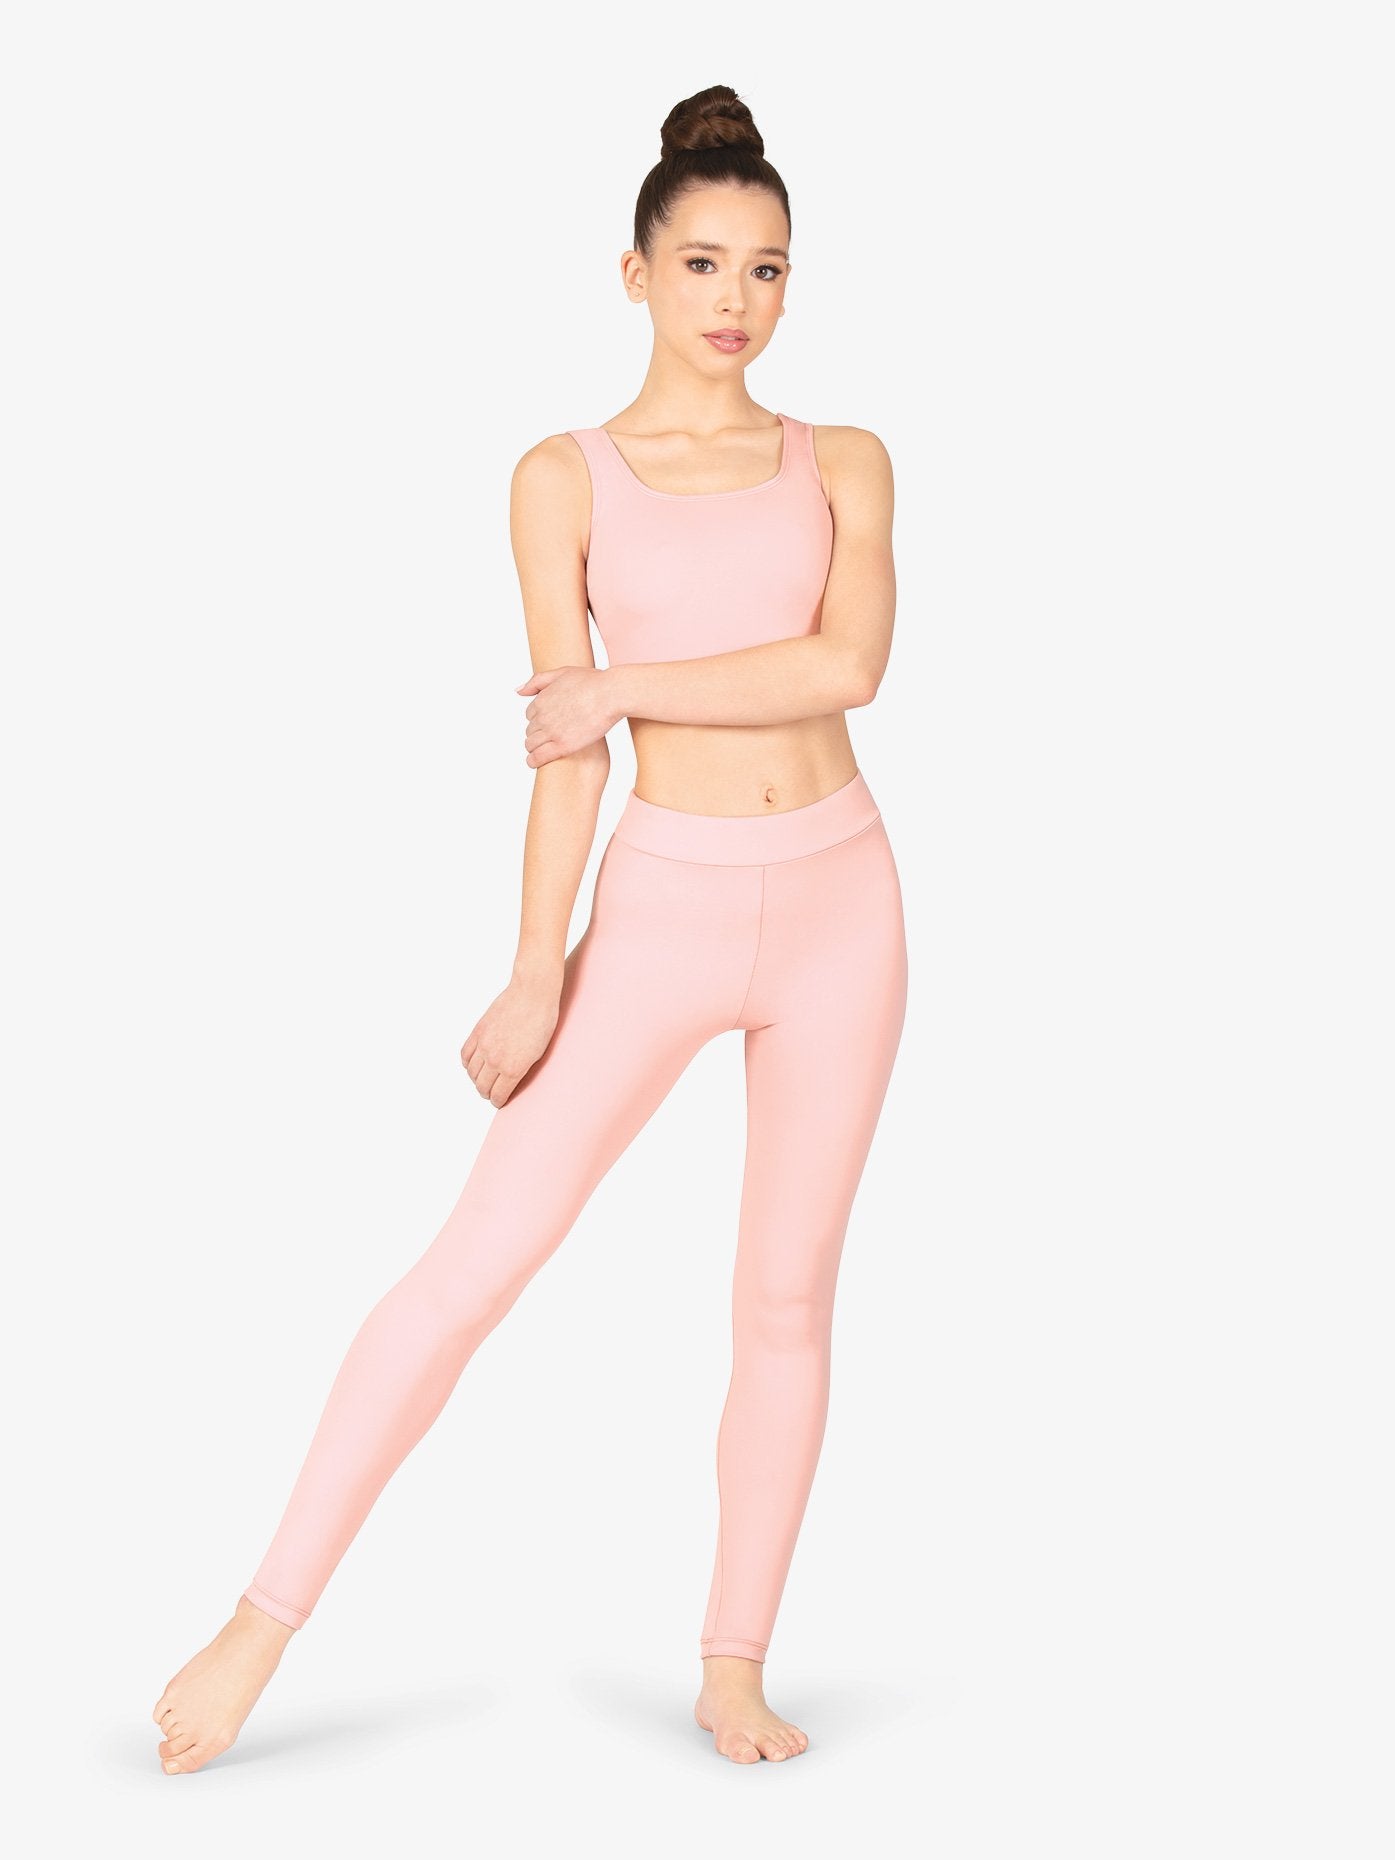 Women’s butter soft light pink leggings offering comfort and style